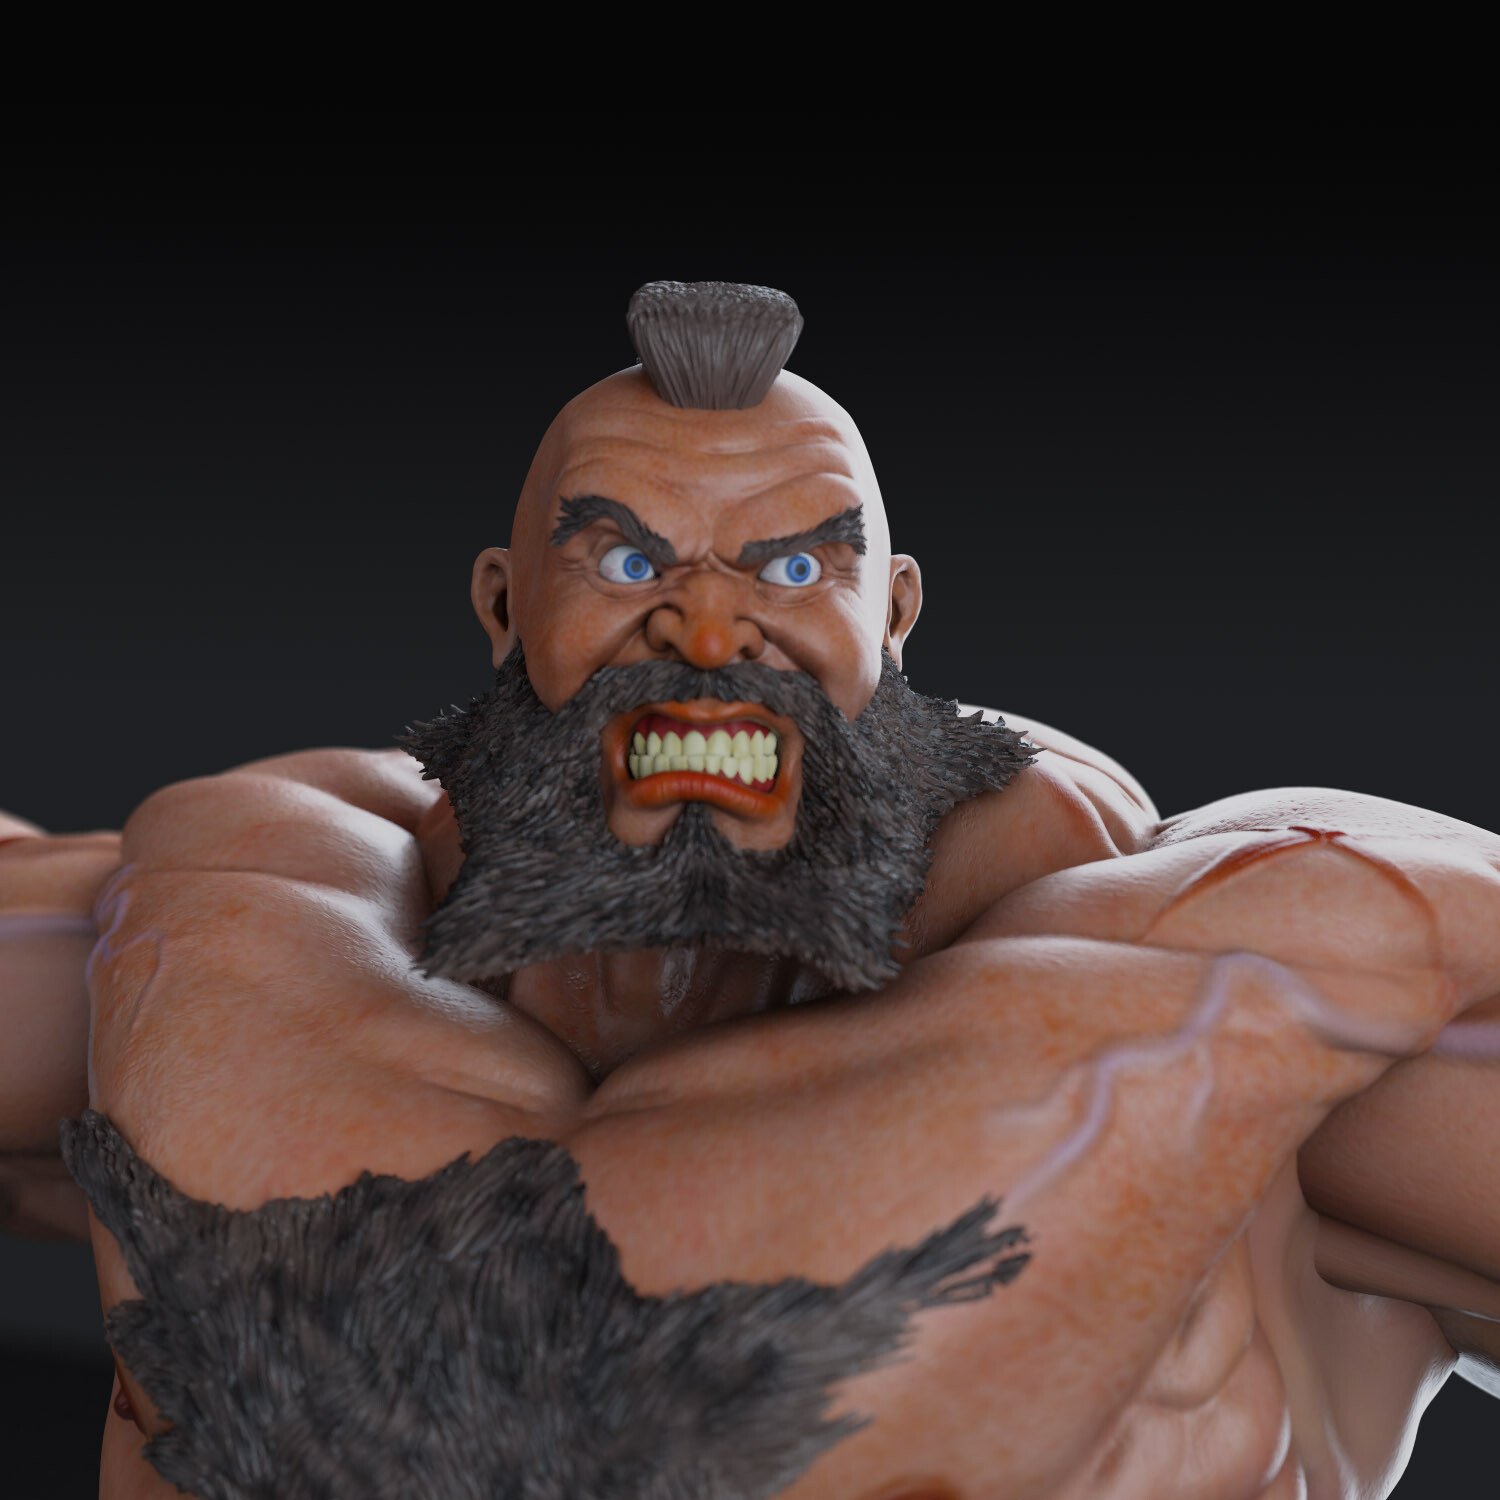 Anderson Soares3D - RYU - Street Fighter